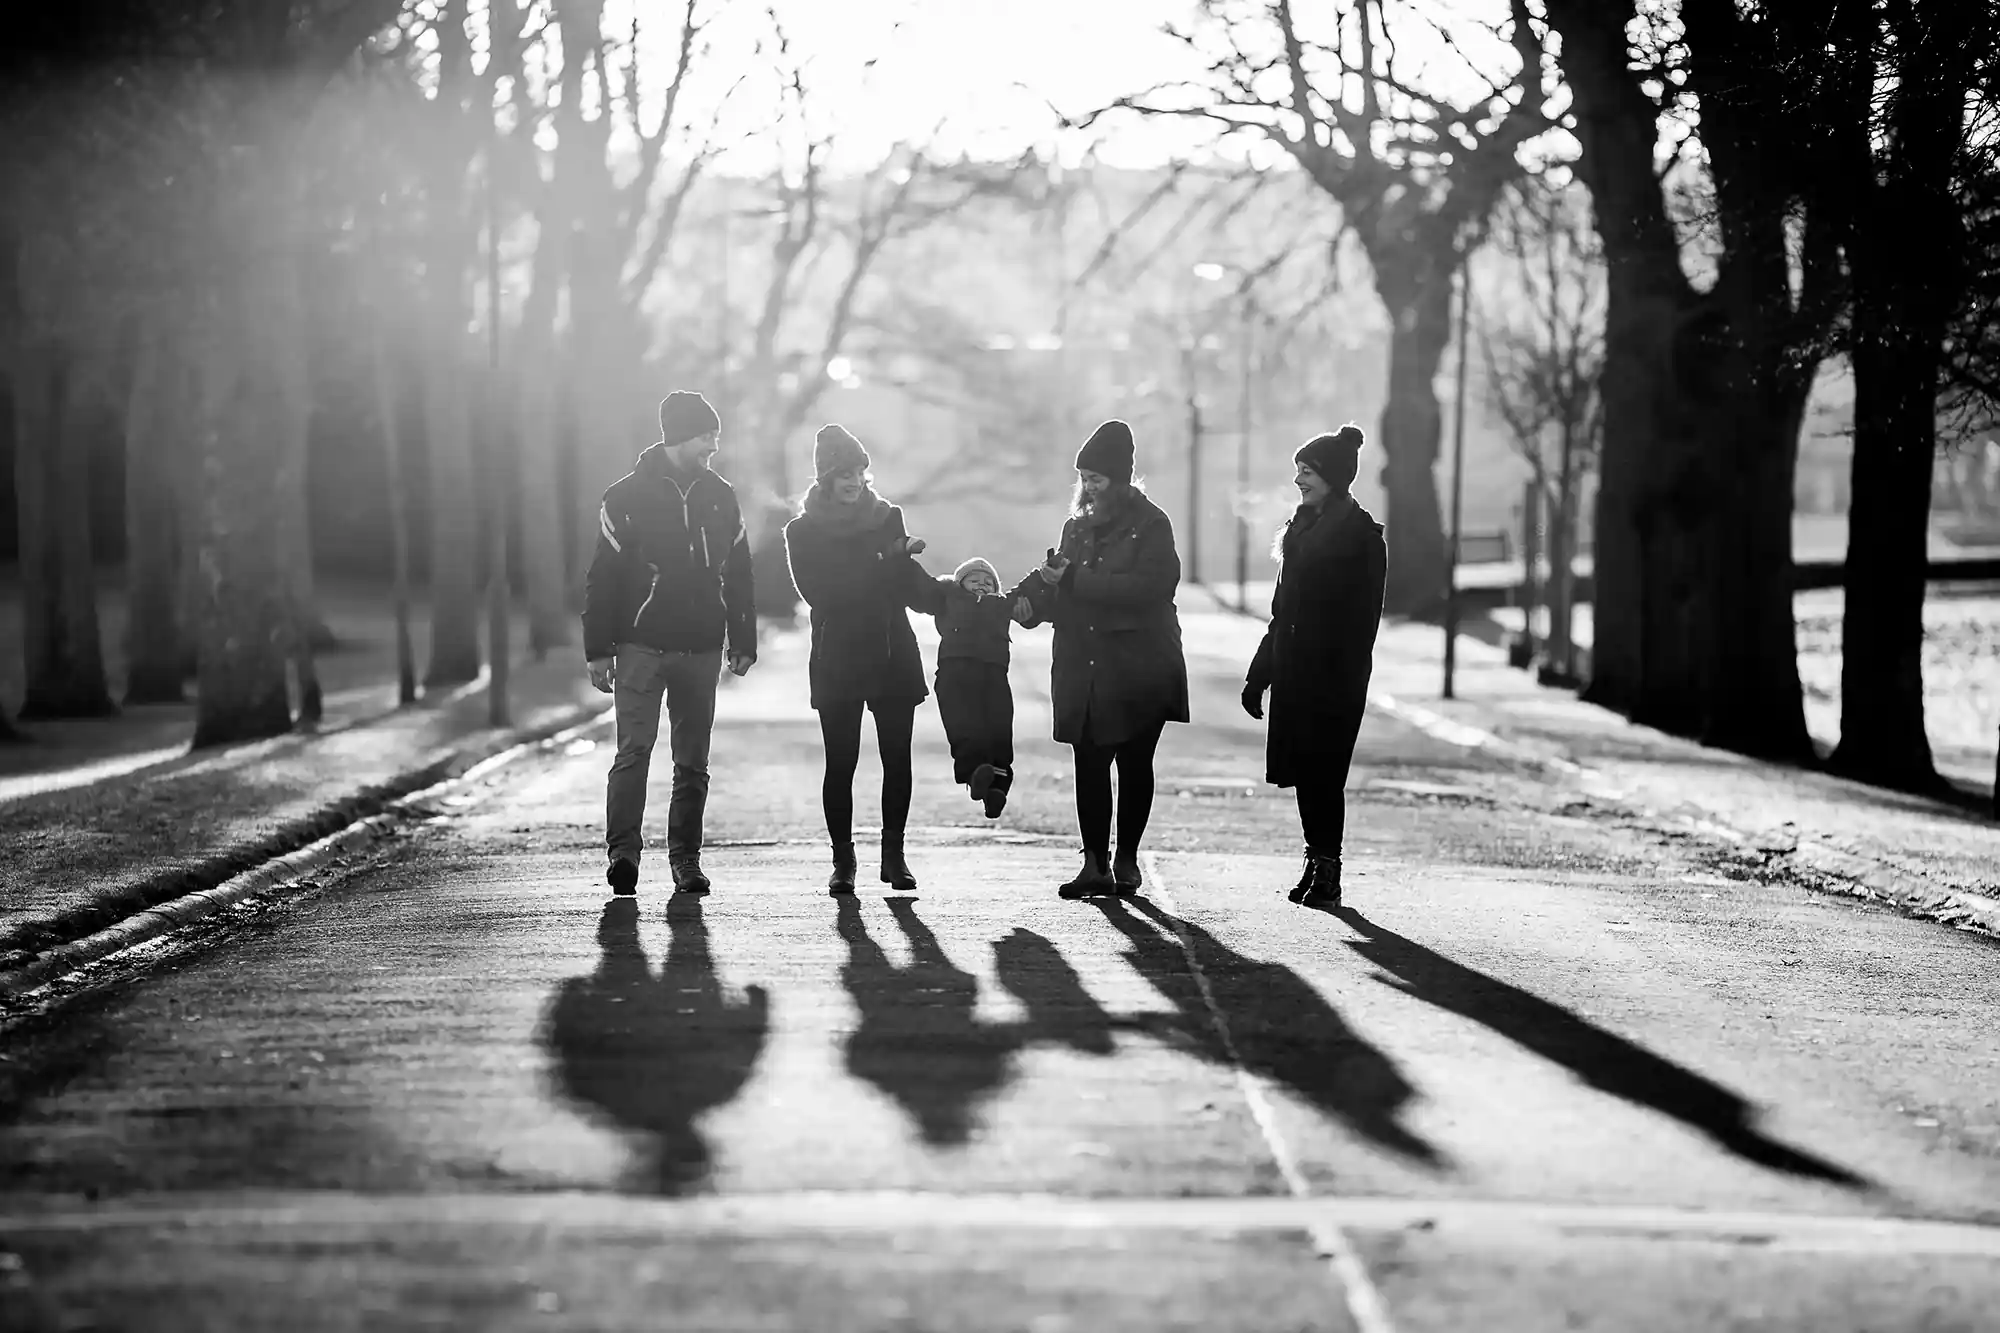 A group of five people walking down a tree-lined path in winter, casting long shadows in the late afternoon sun. The scene is in black and white.